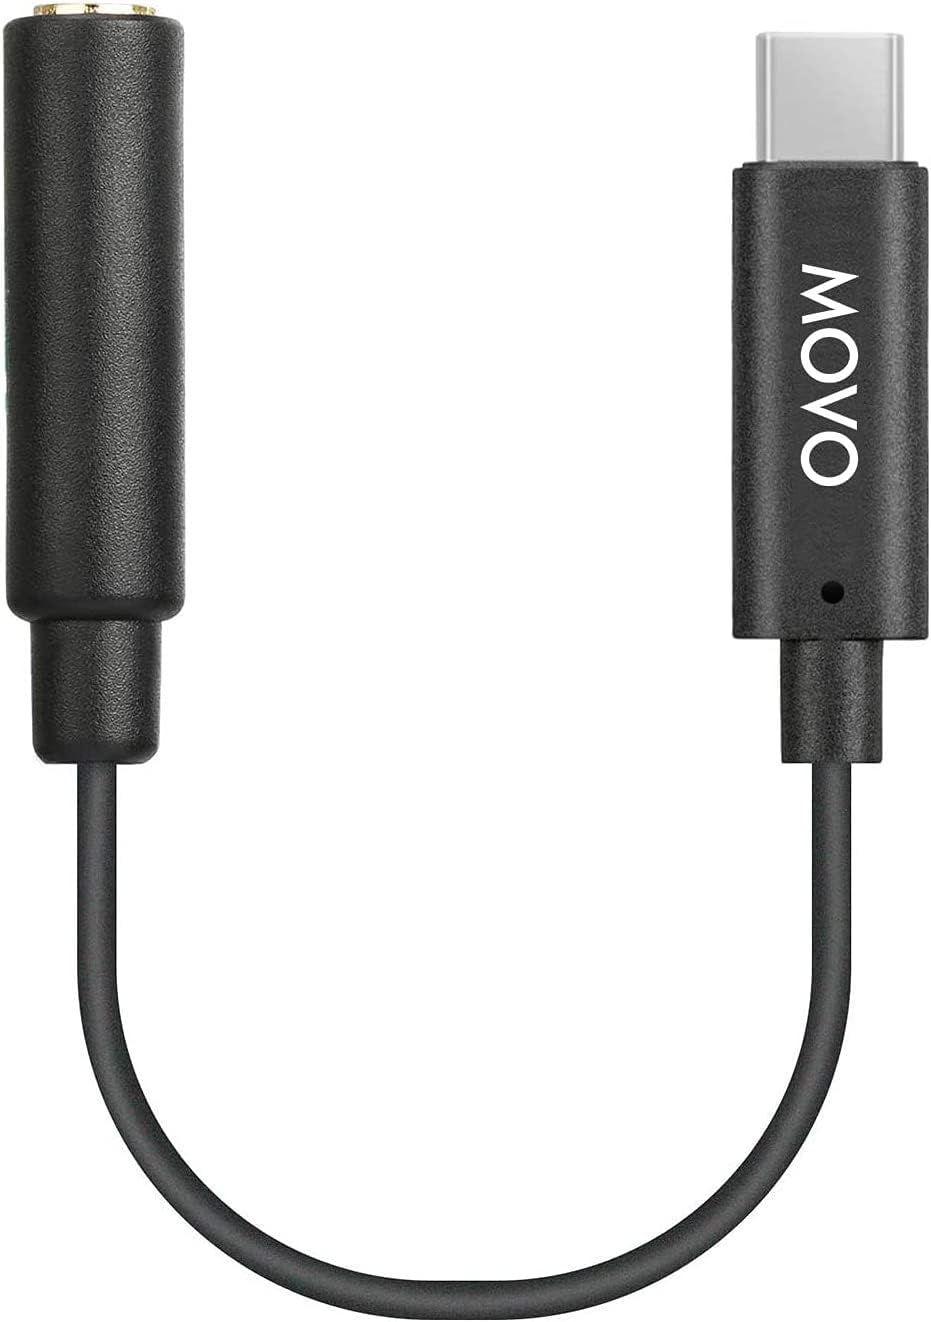 Movo UCMA-1 Female 3.5mm TRS Microphone Adapter Cable to USB Type-C Connector Dongle, Compatible with Samsung Galaxy, Pixel, Moto, HTC, iPad Pro Smartphones and Tablets  - Like New